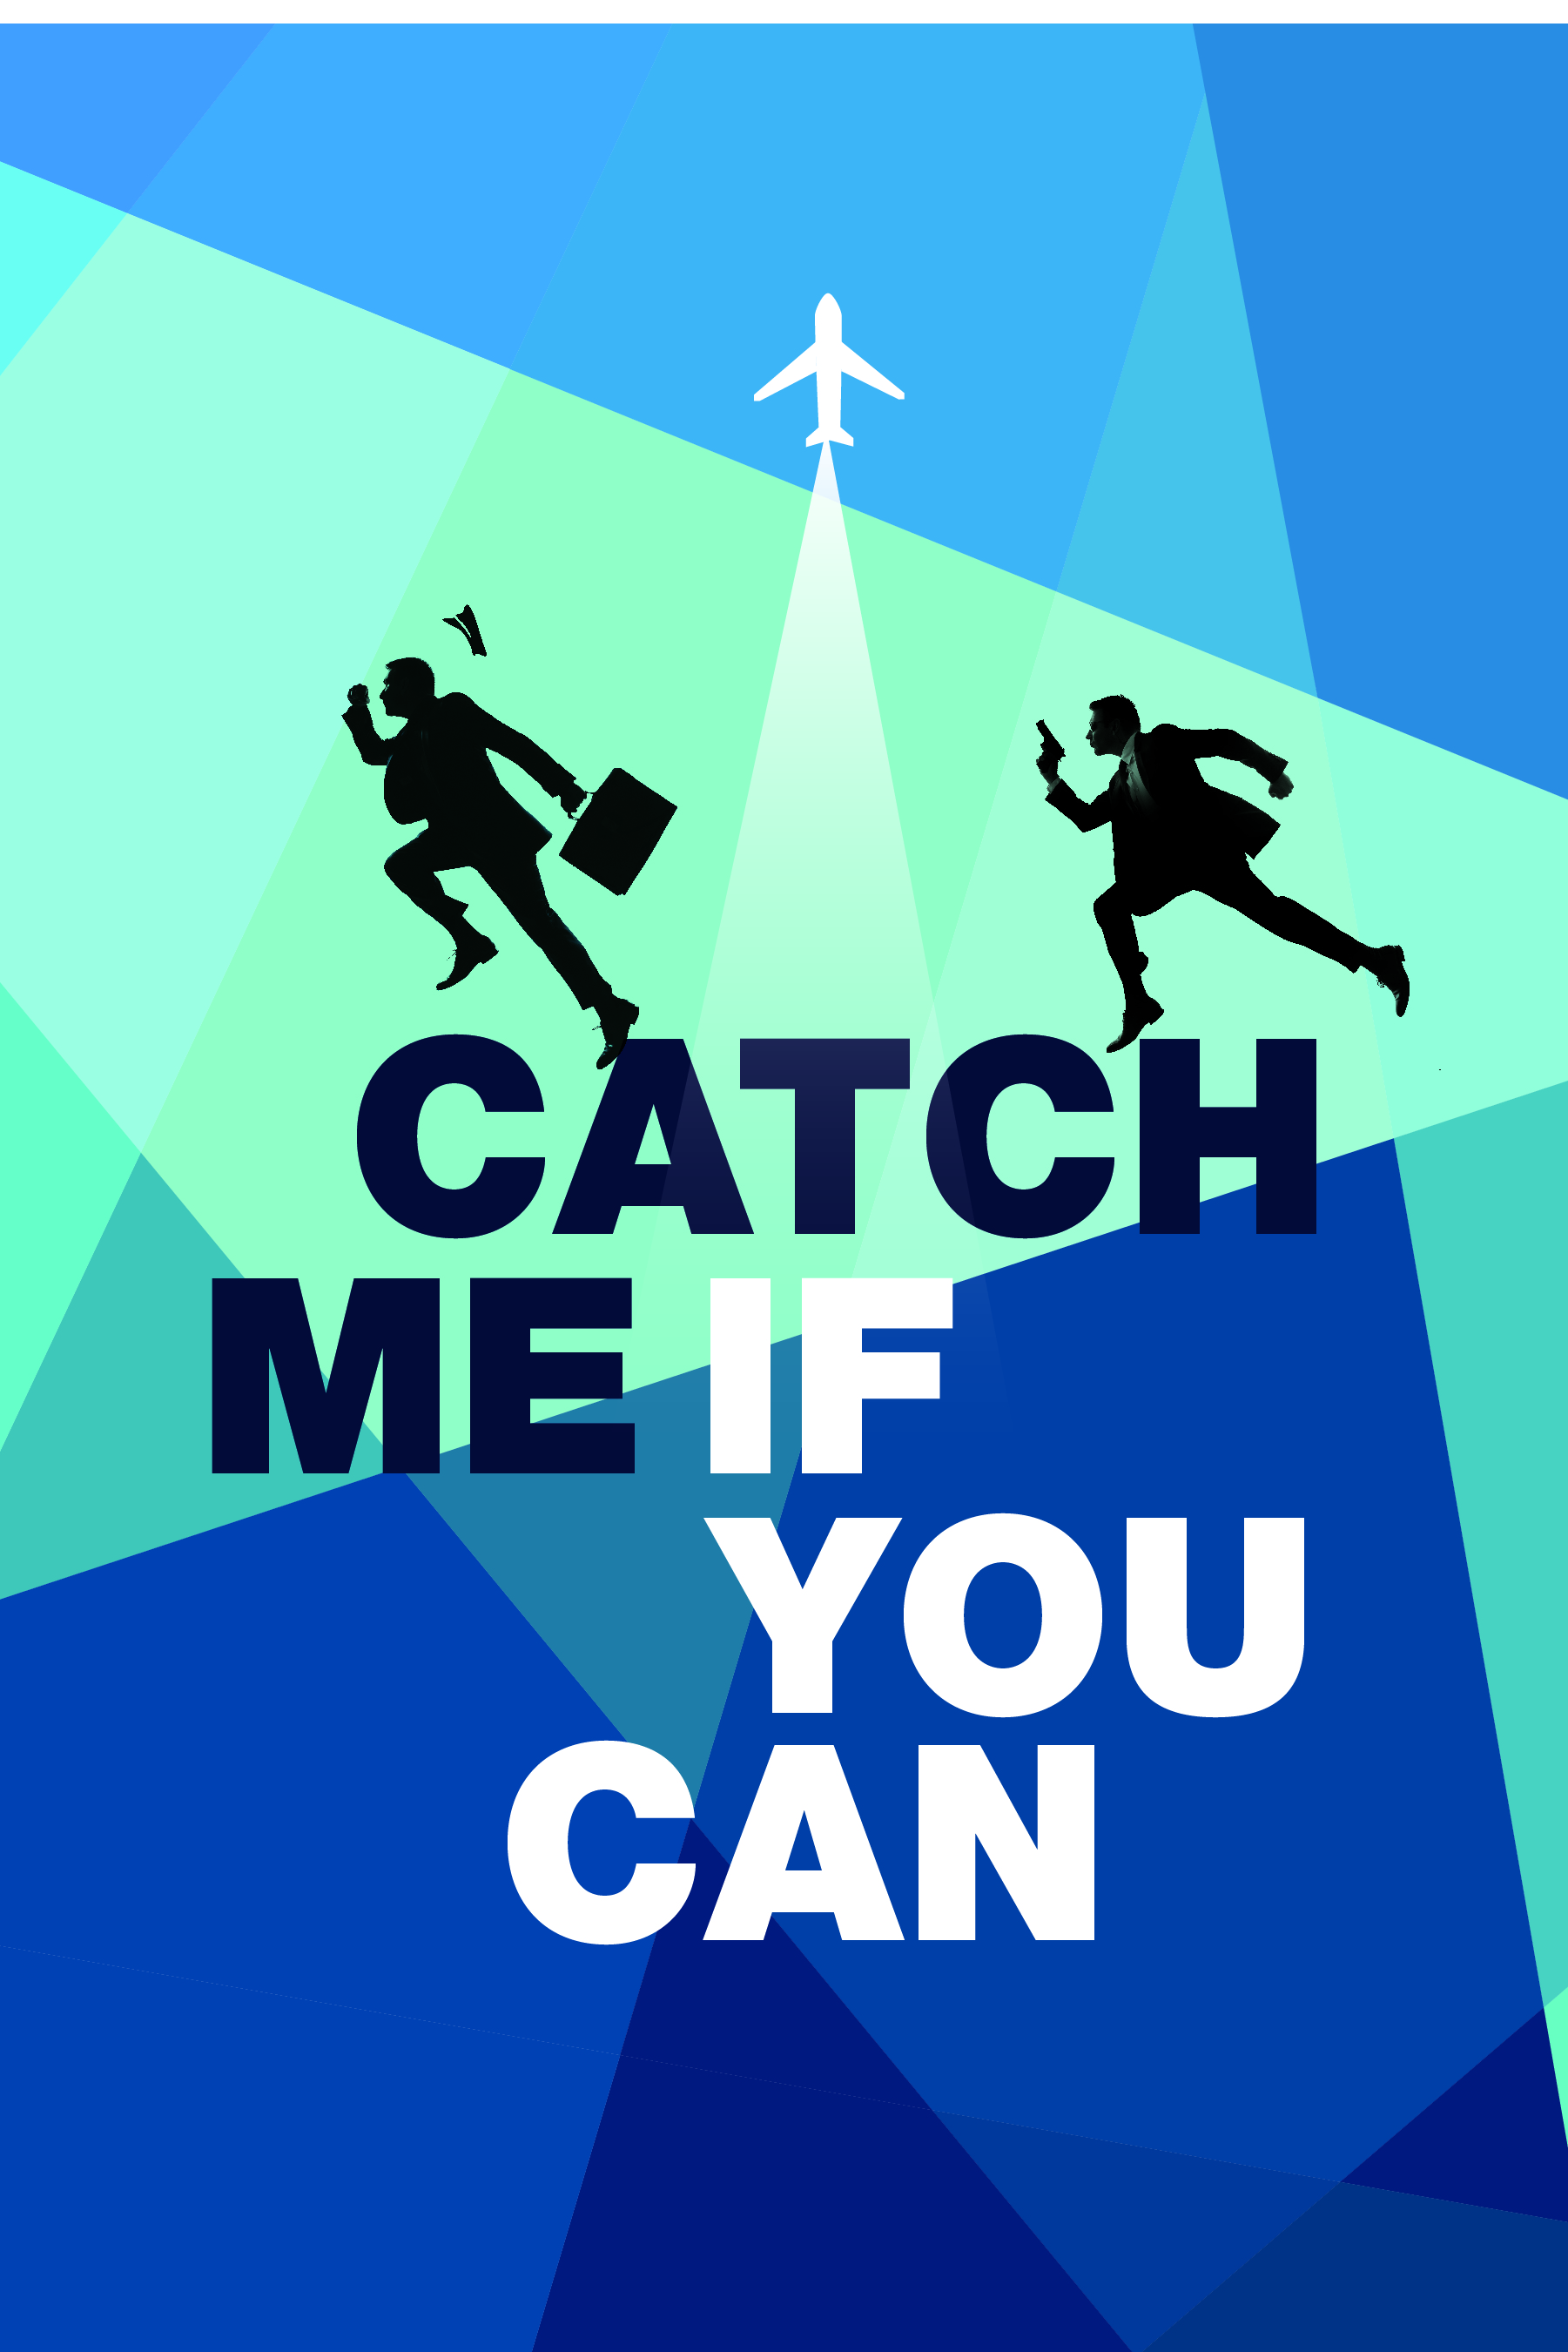 You catch can if me